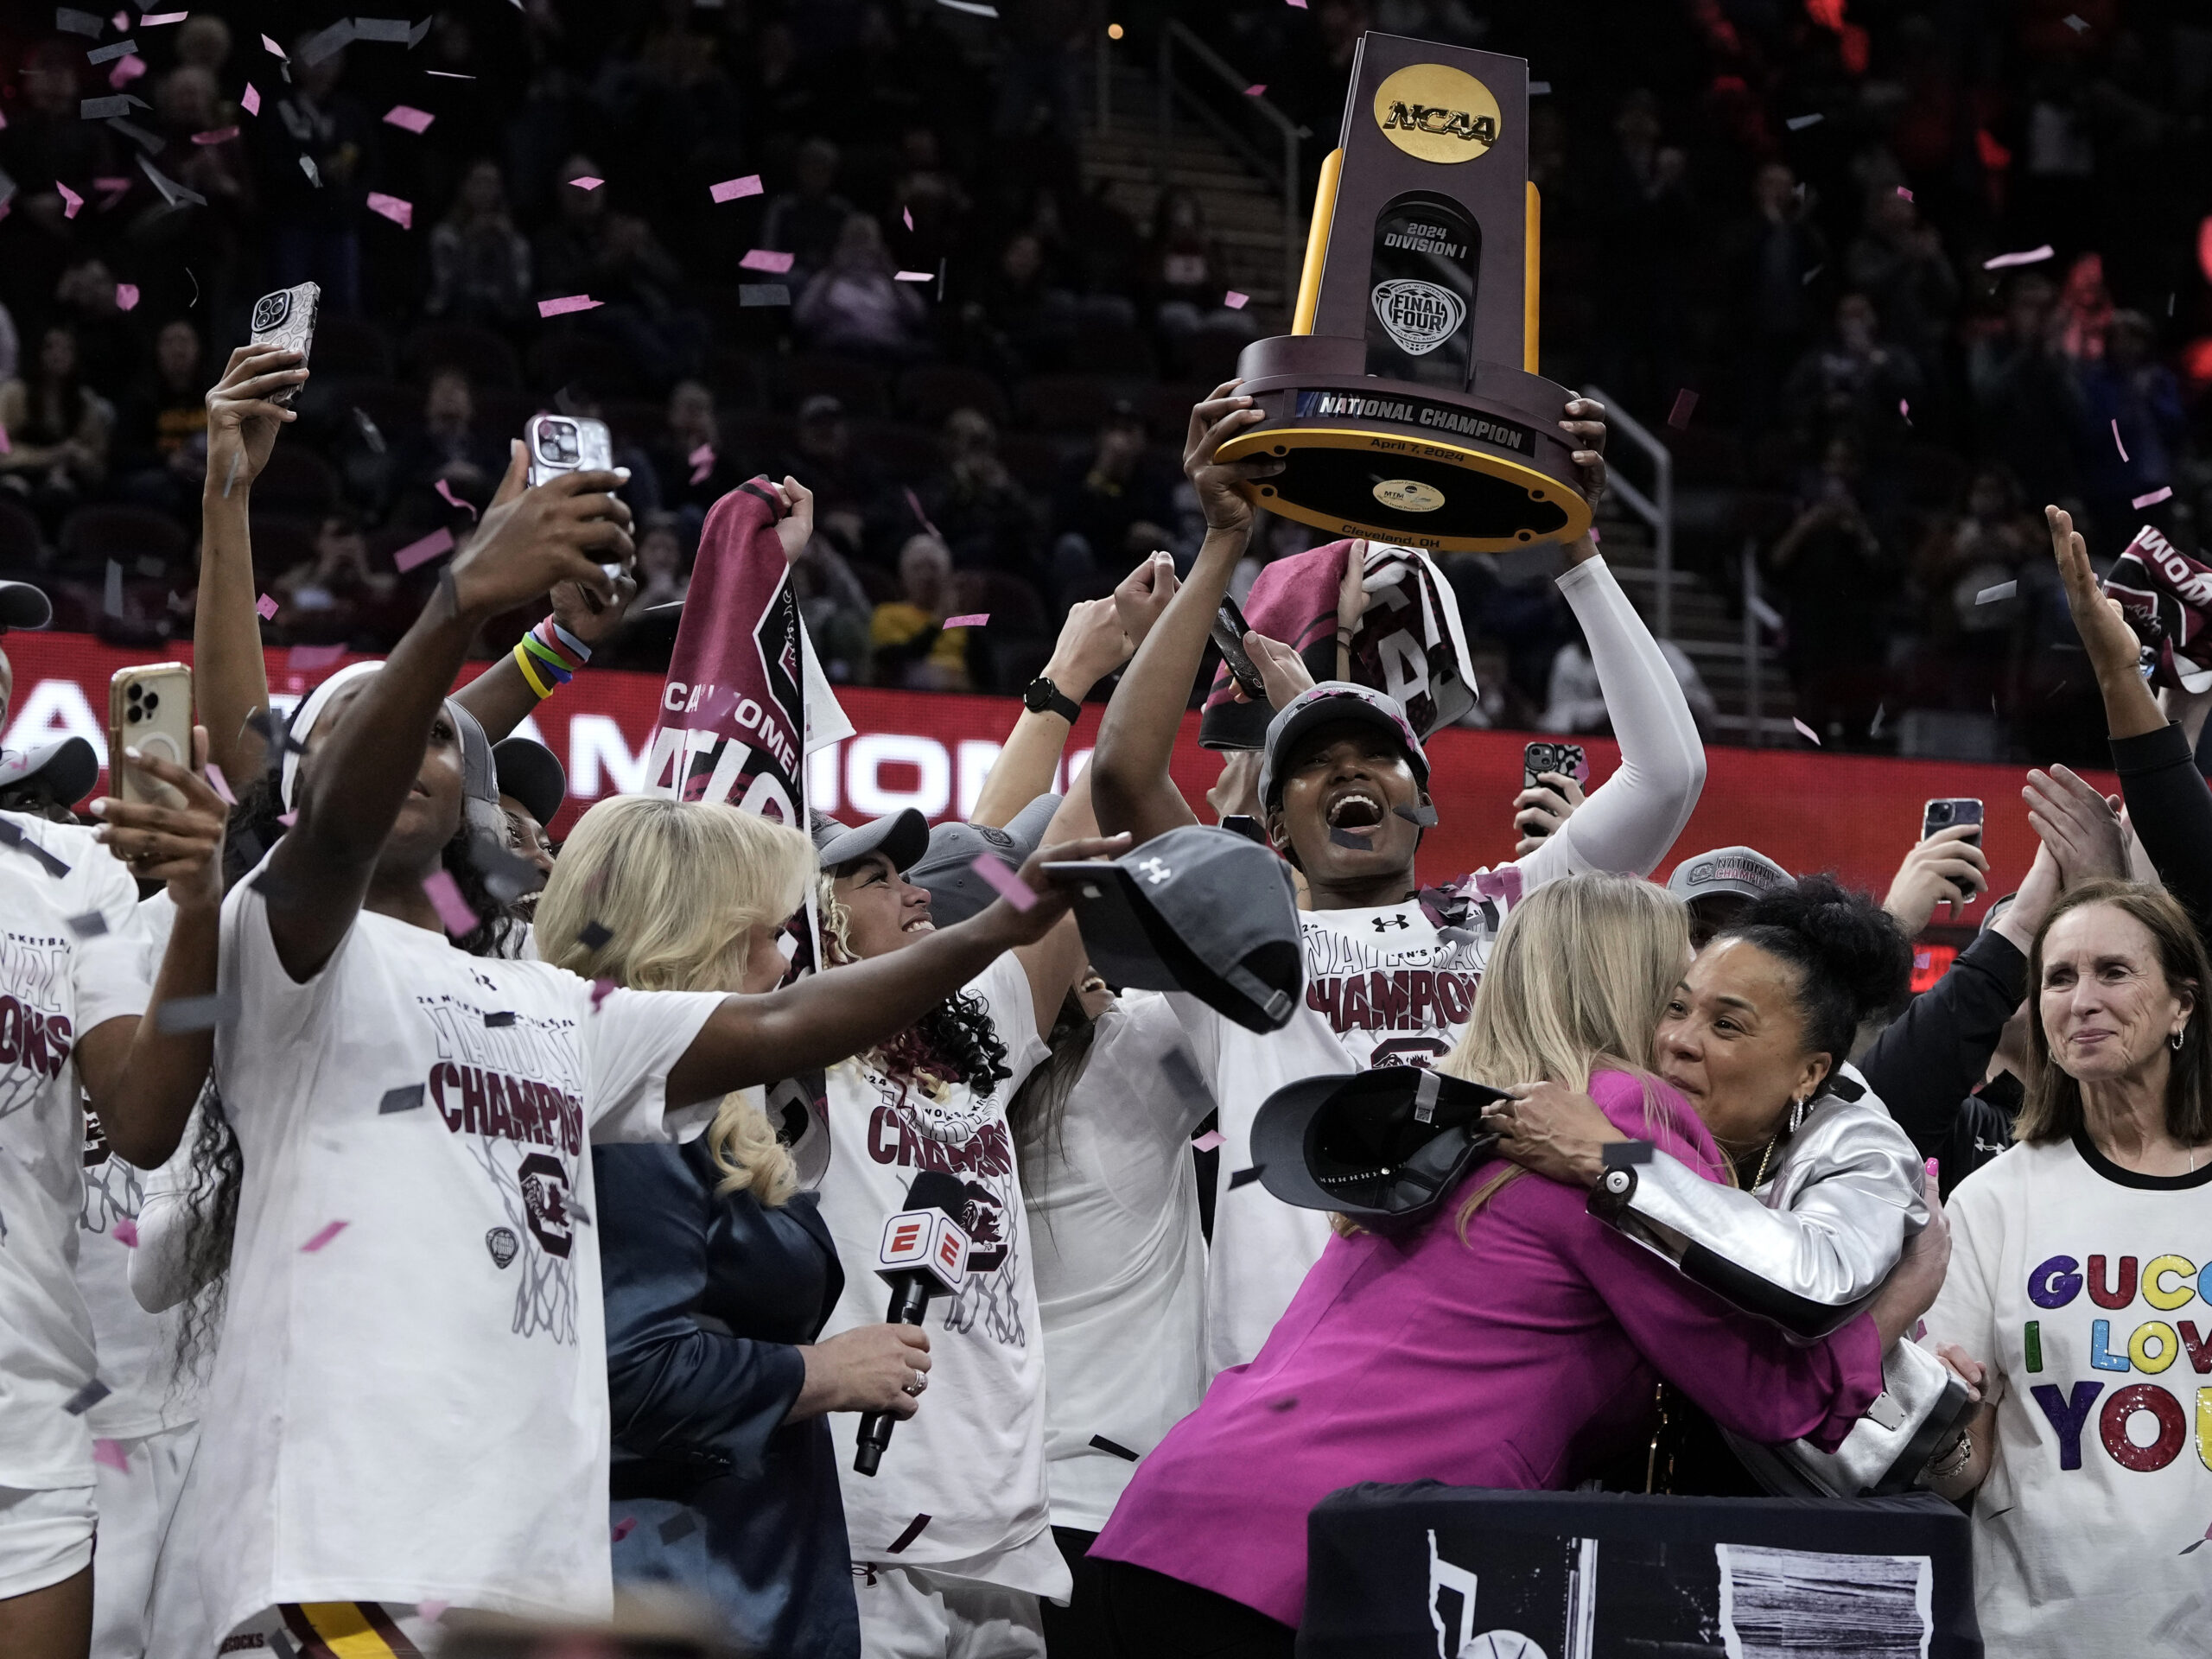 South Carolina's players and coach celebrate after the college basketball championship game against Iowa in the women's NCAA Tournament on Sunday. South Carolina won 87-75.